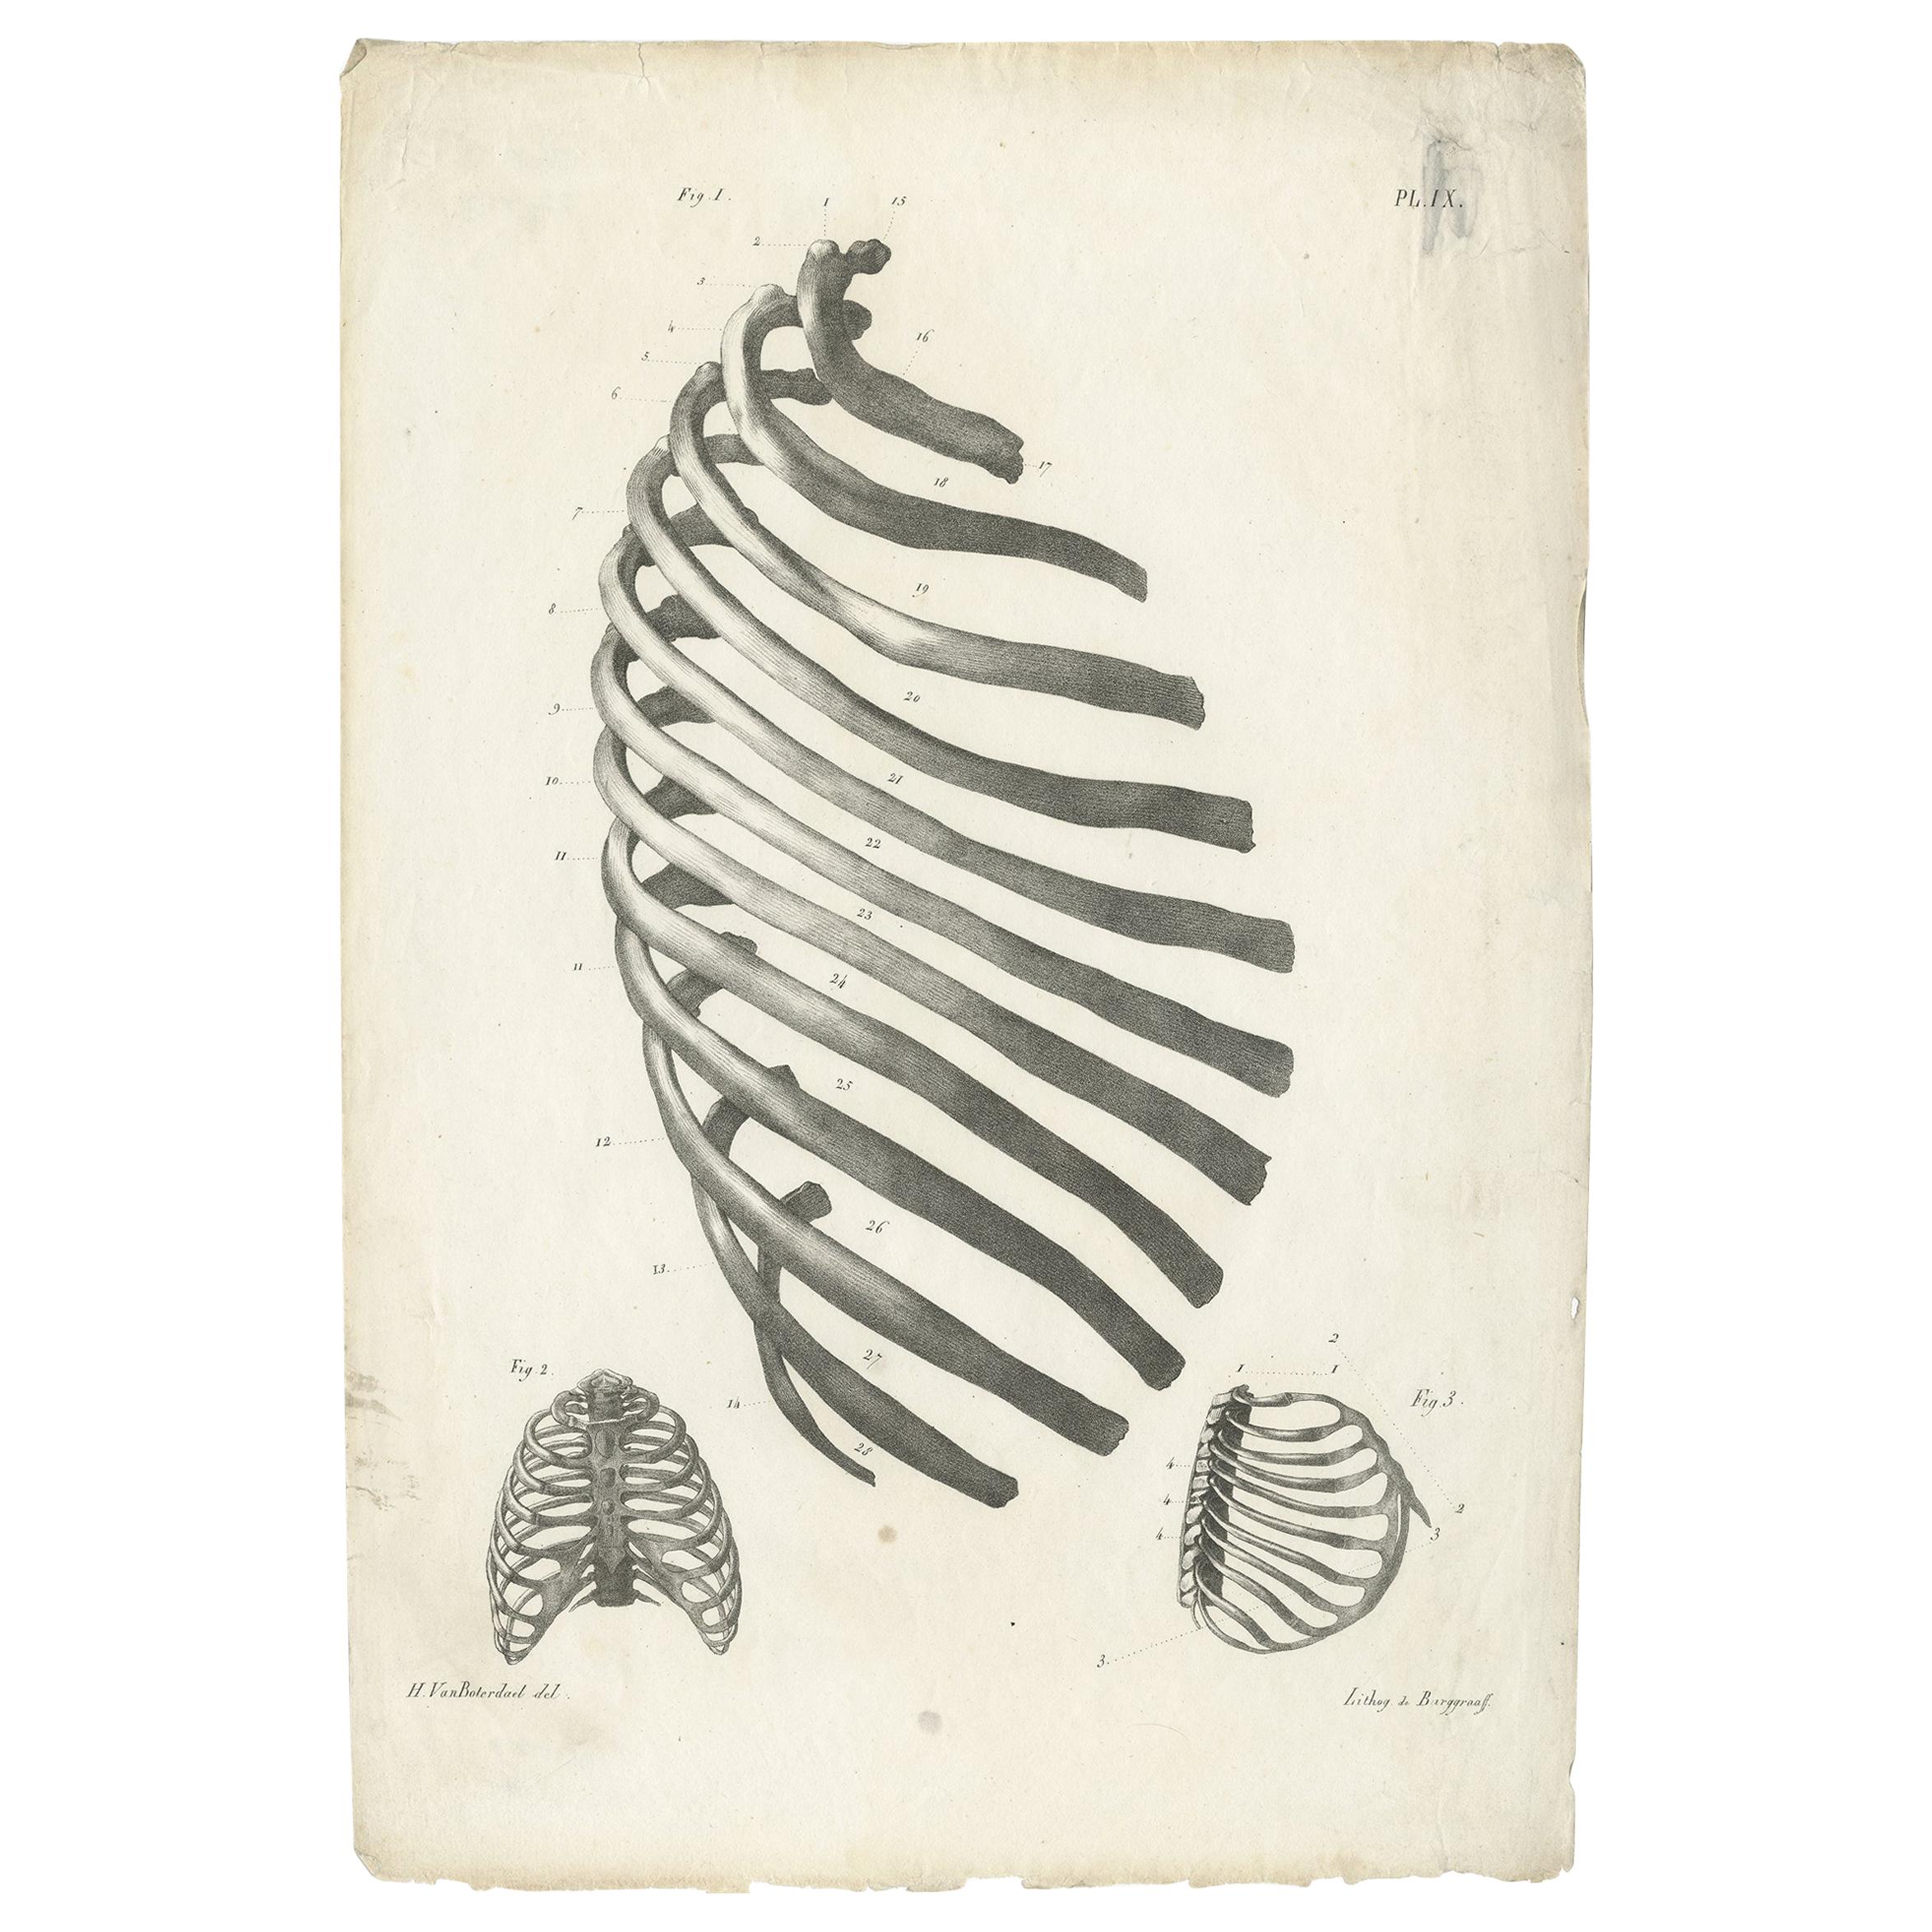 Pl. IX Antique Anatomy / Medical Print of the Rib Cage by Cloquet '1821'